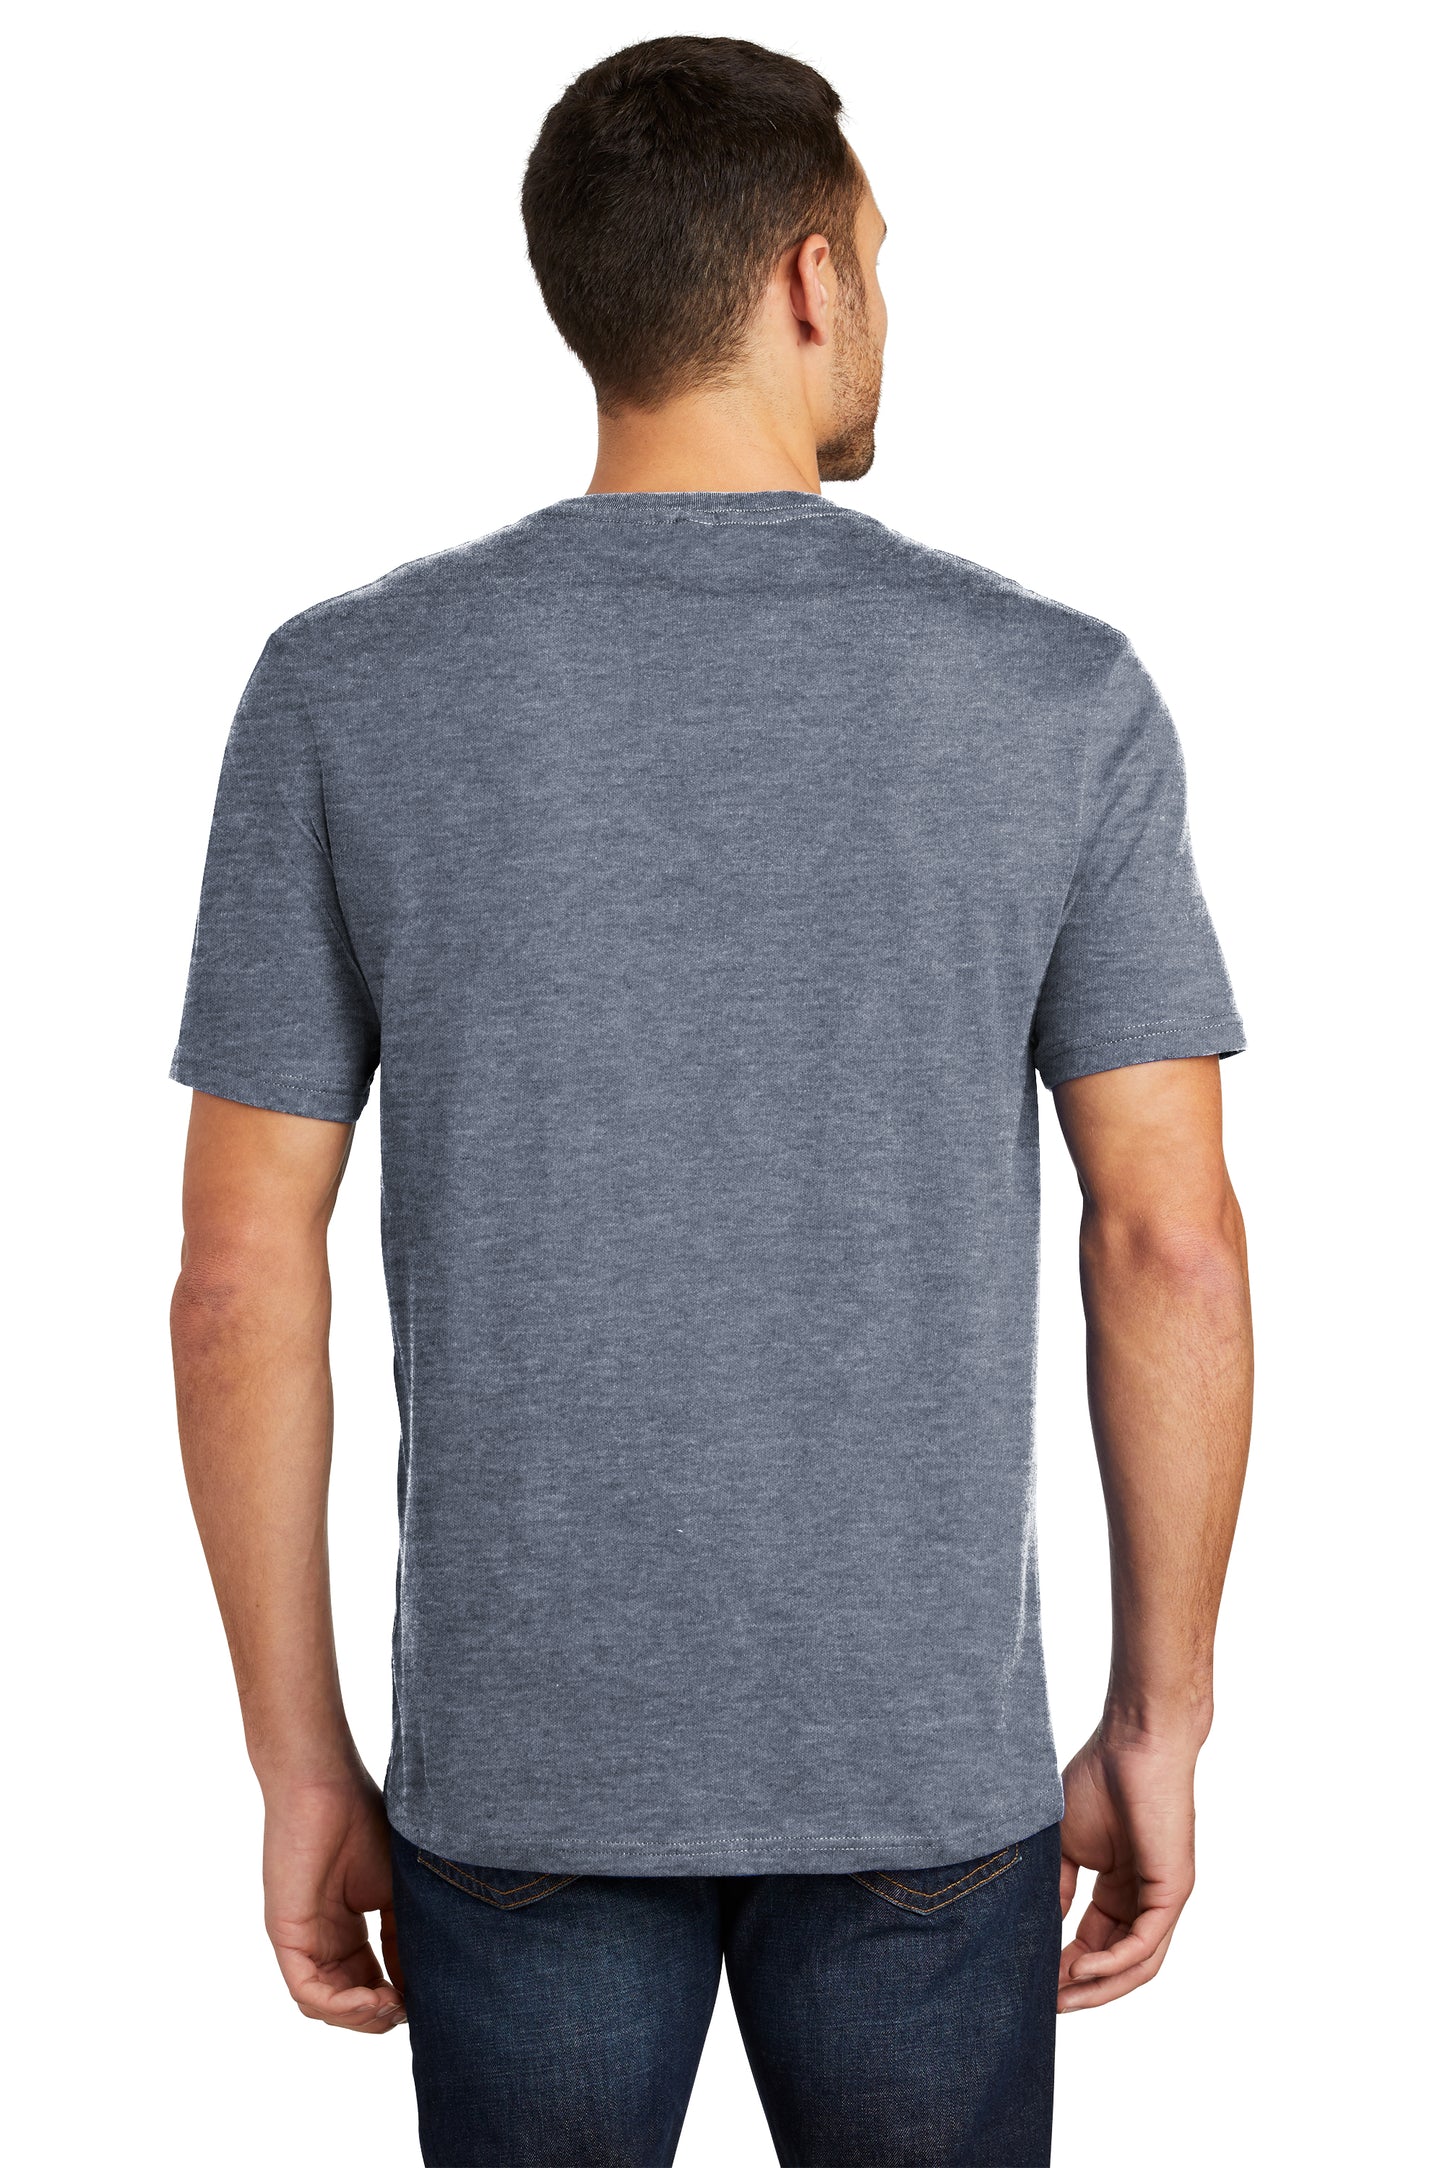 District Perfect Weight Unisex Tee - Heathered Navy